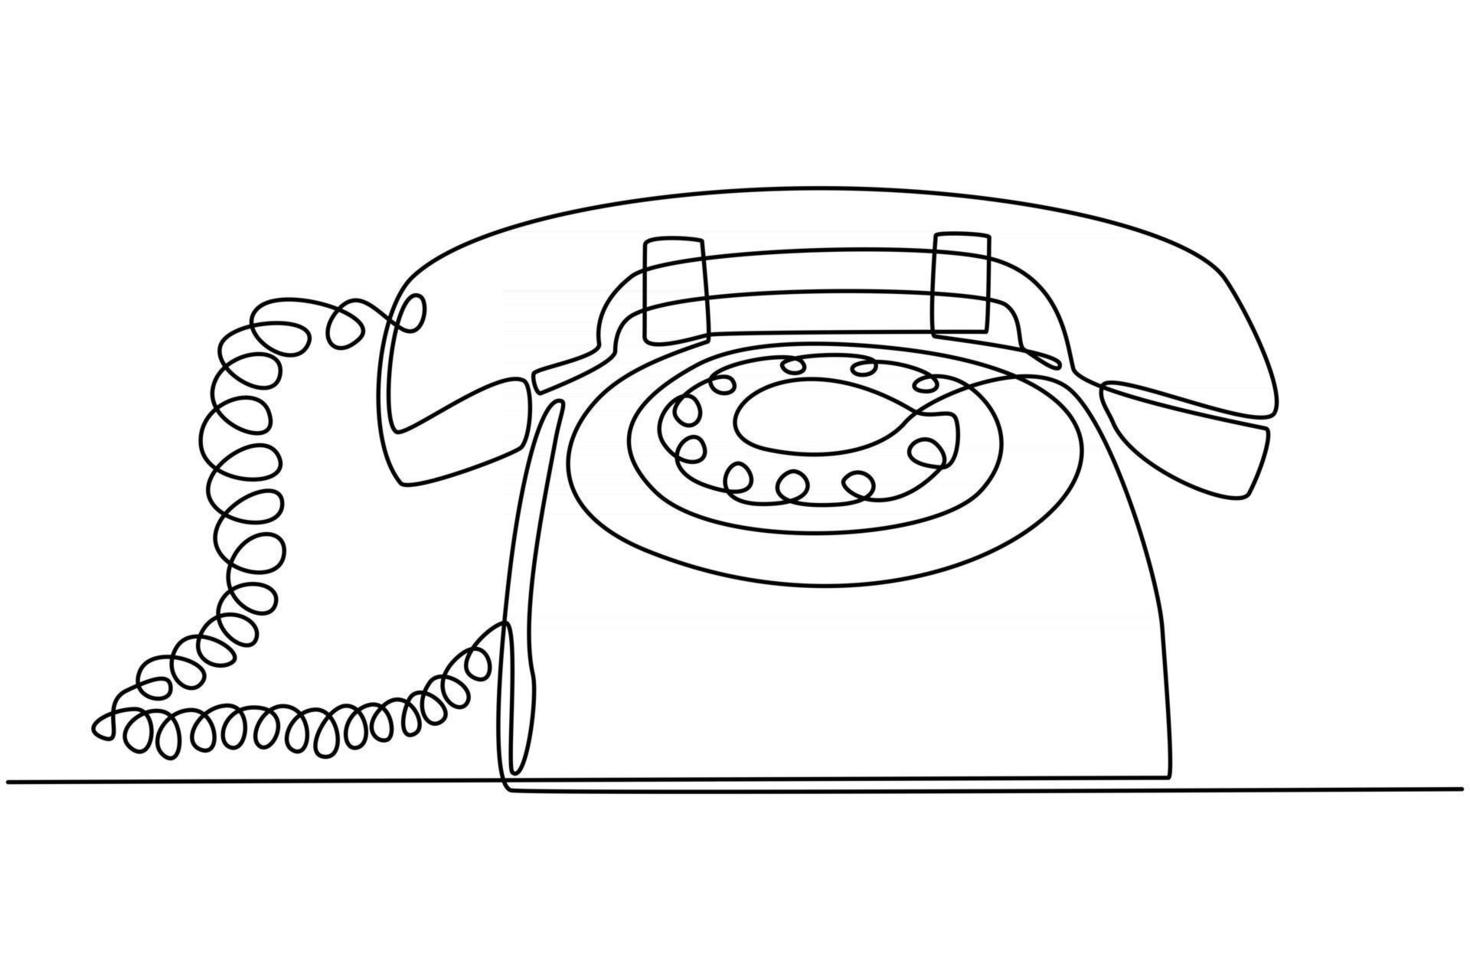 continuous line drawing of vintage retro telephone sketch vector illustration